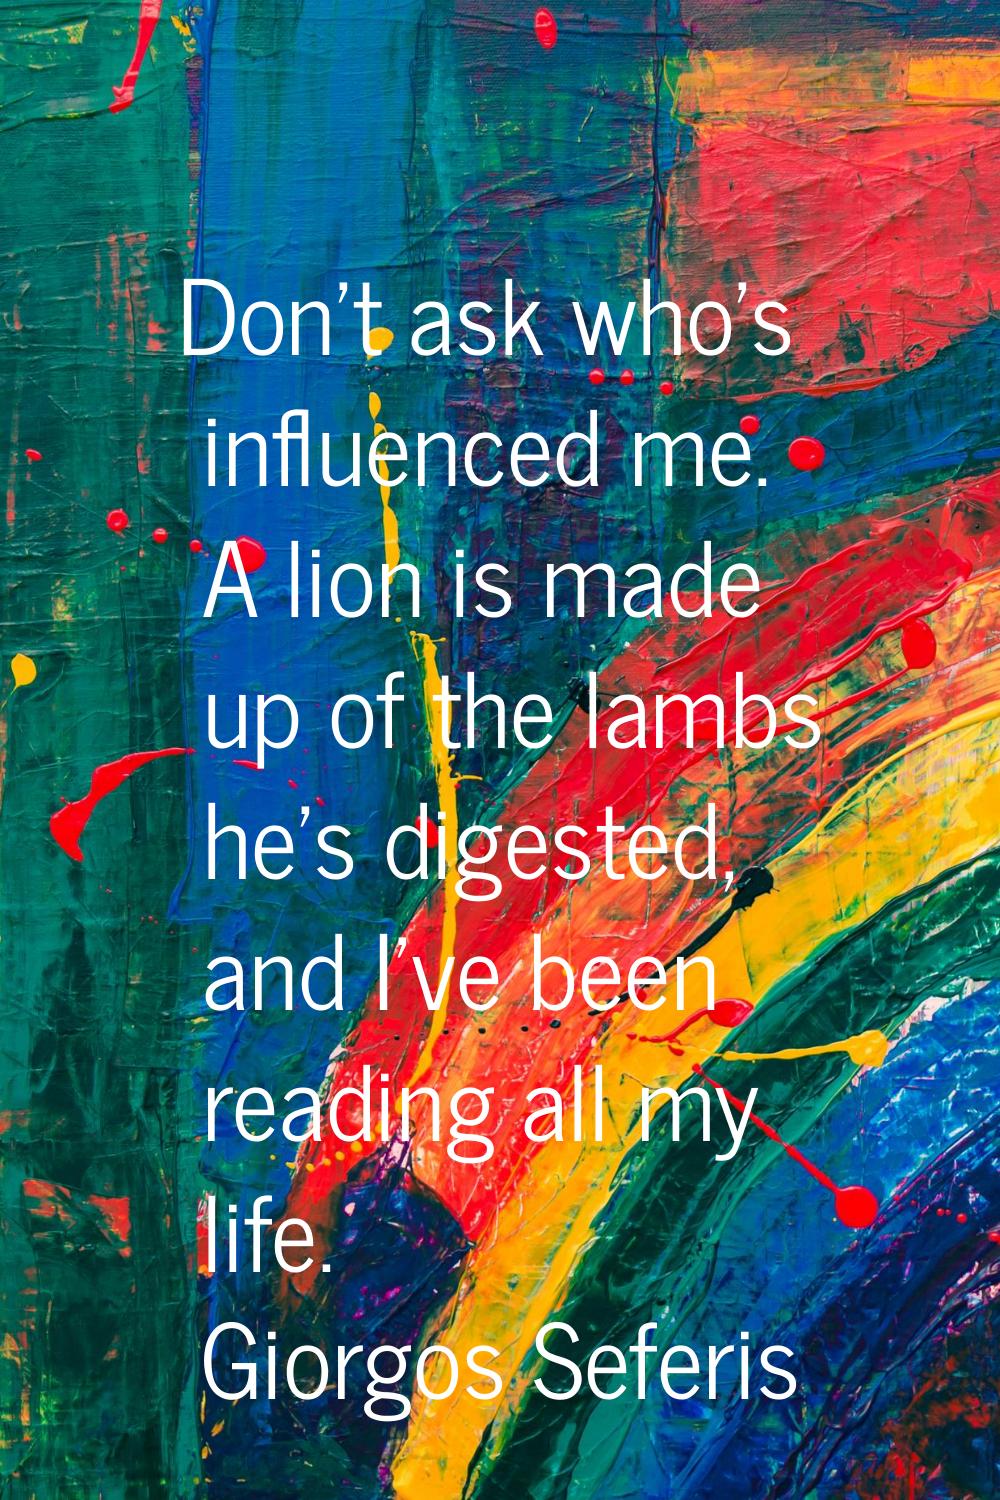 Don't ask who's influenced me. A lion is made up of the lambs he's digested, and I've been reading 